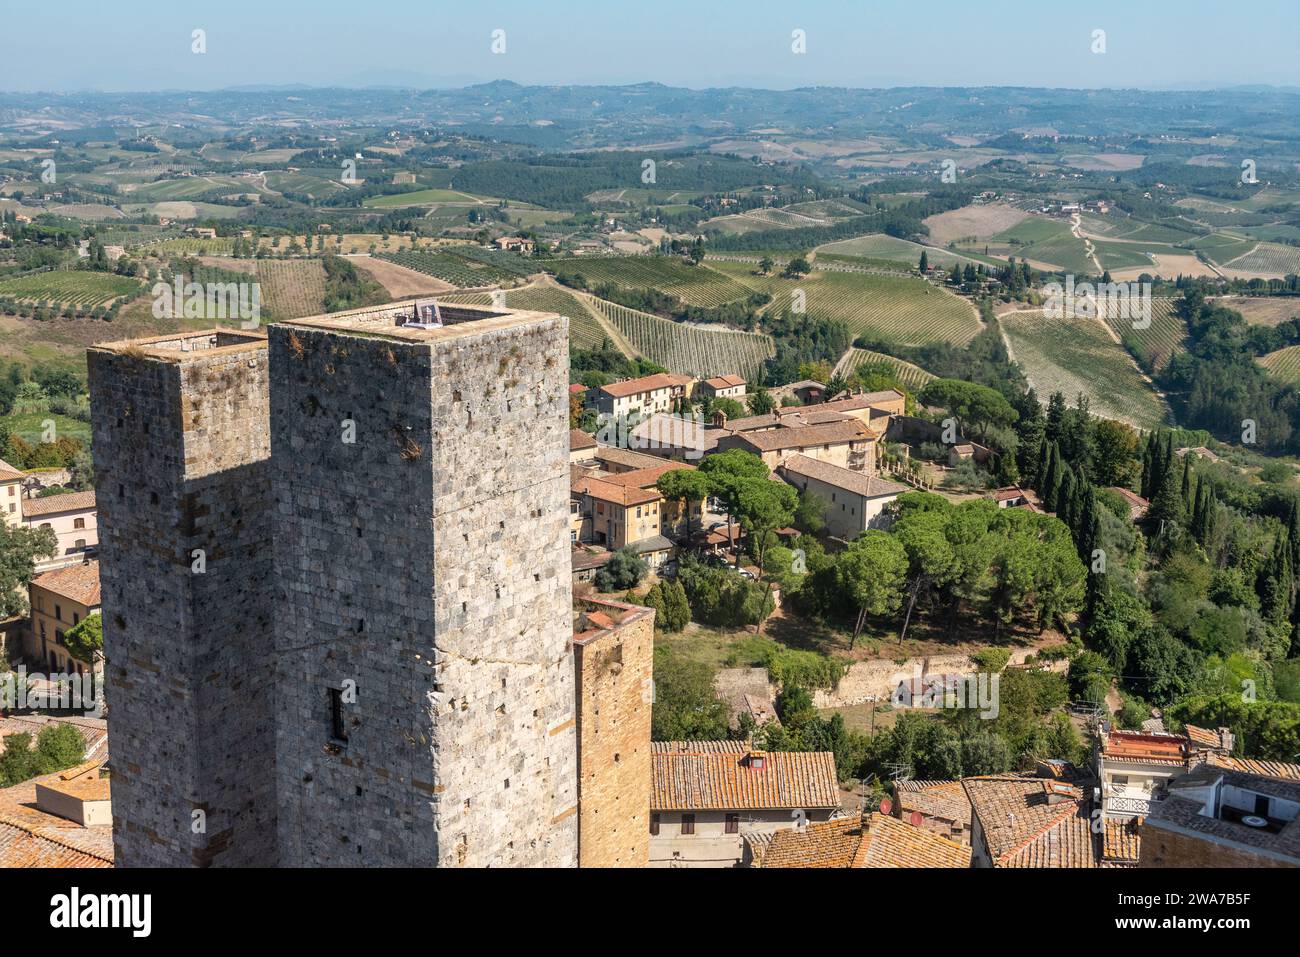 Wide panoramic view over downtown San Gimignano, Torri dei Salvucci in the center, seen from Torre Grosso, Italy Stock Photo